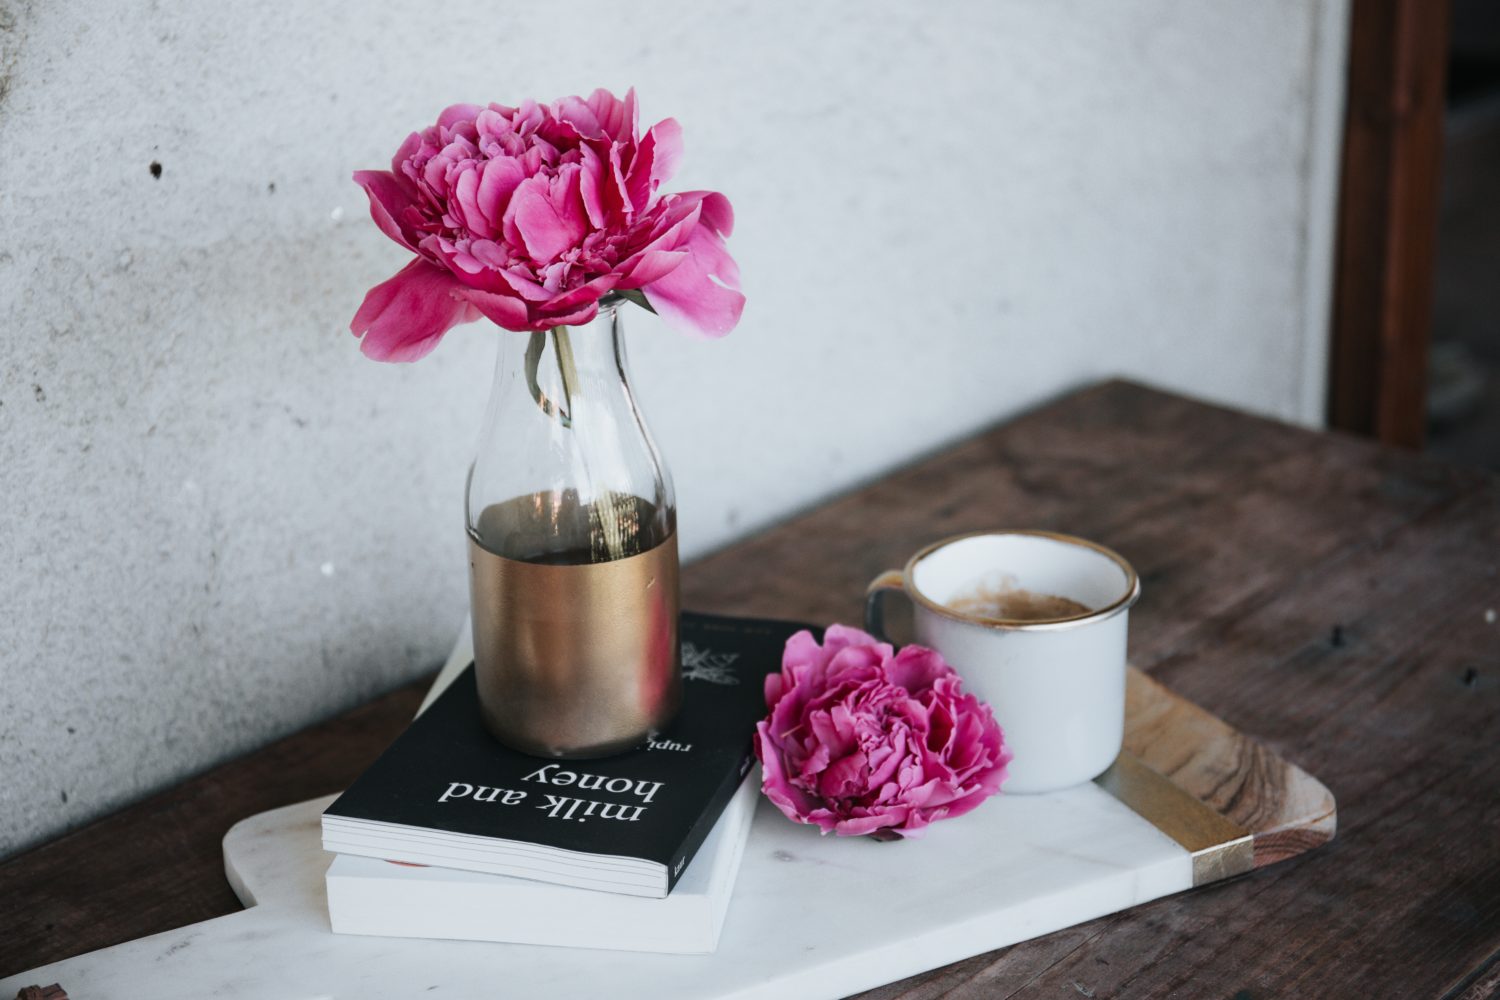 Pink flowers, a book and tea.